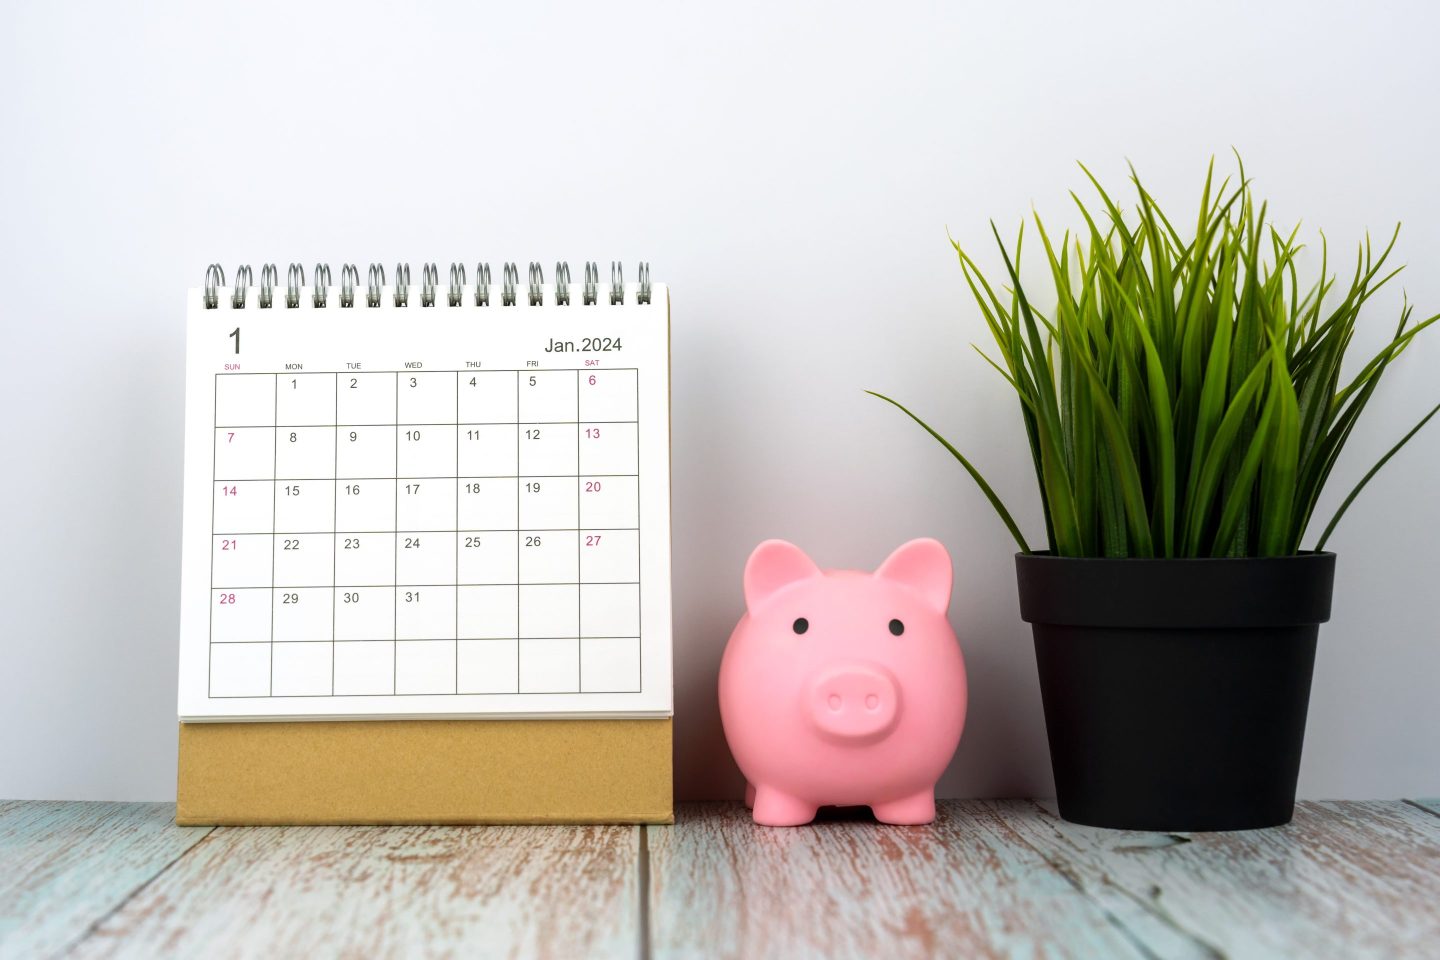 January 2024 Desk Calendar With Piggy Bank and Potted Plant